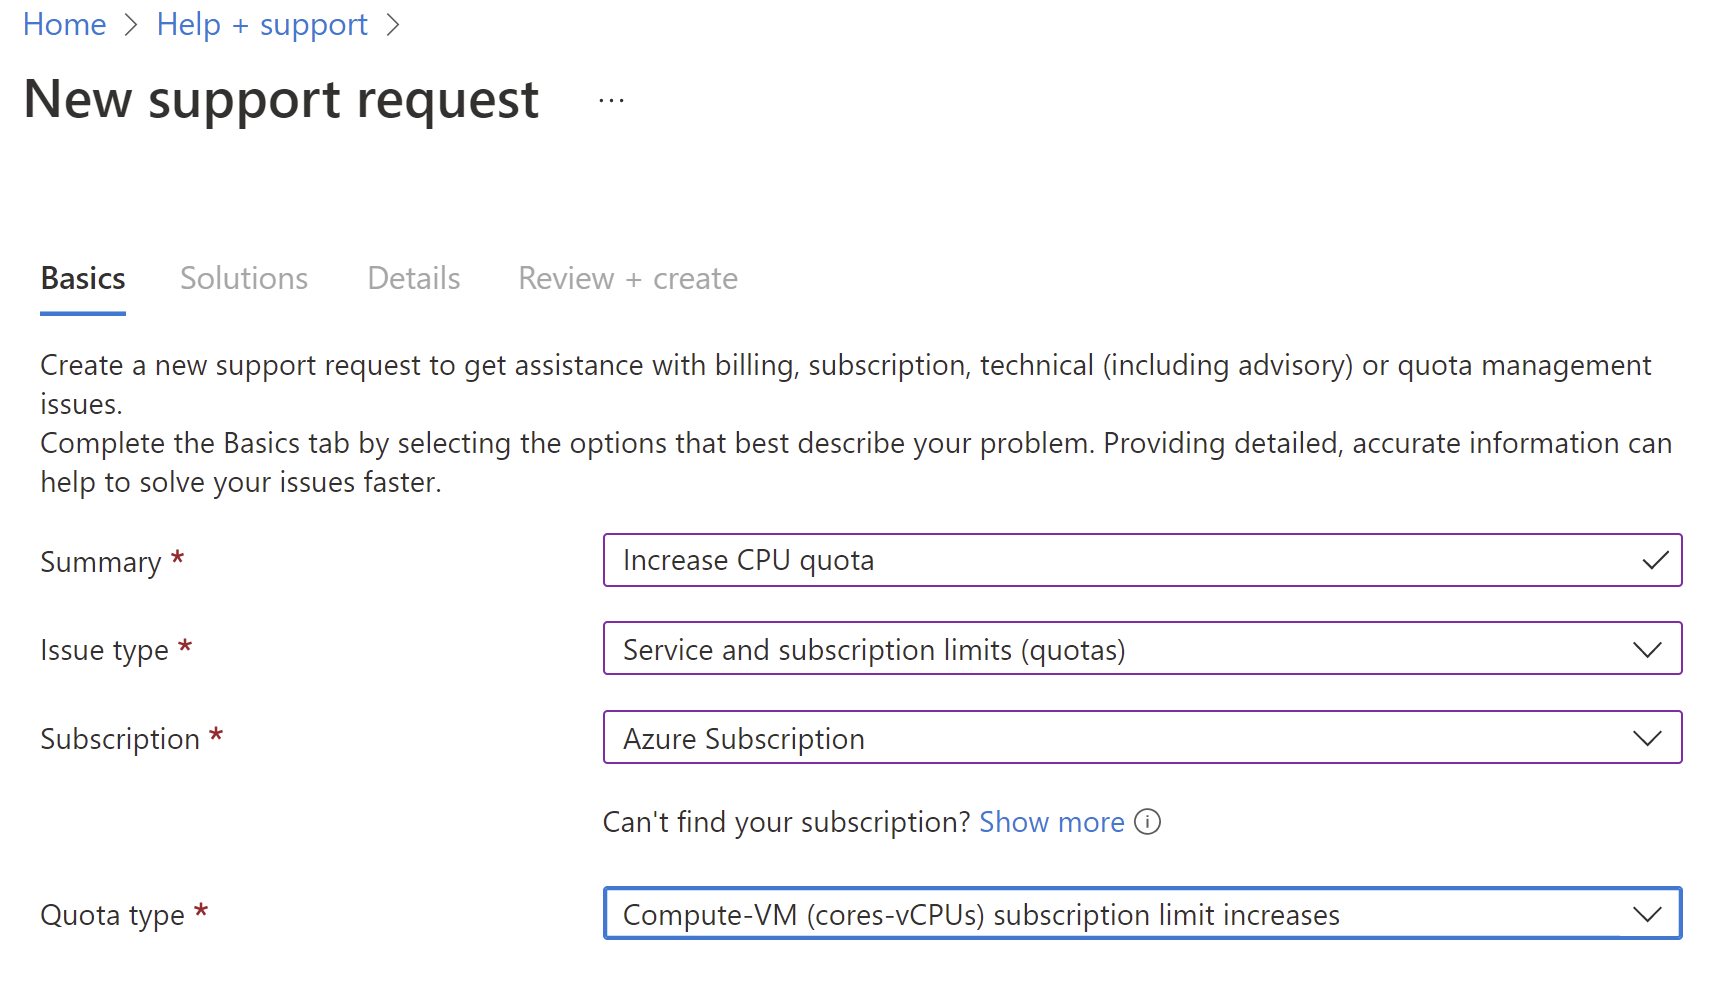 Screenshot of the New Support Request information under Basics tab.